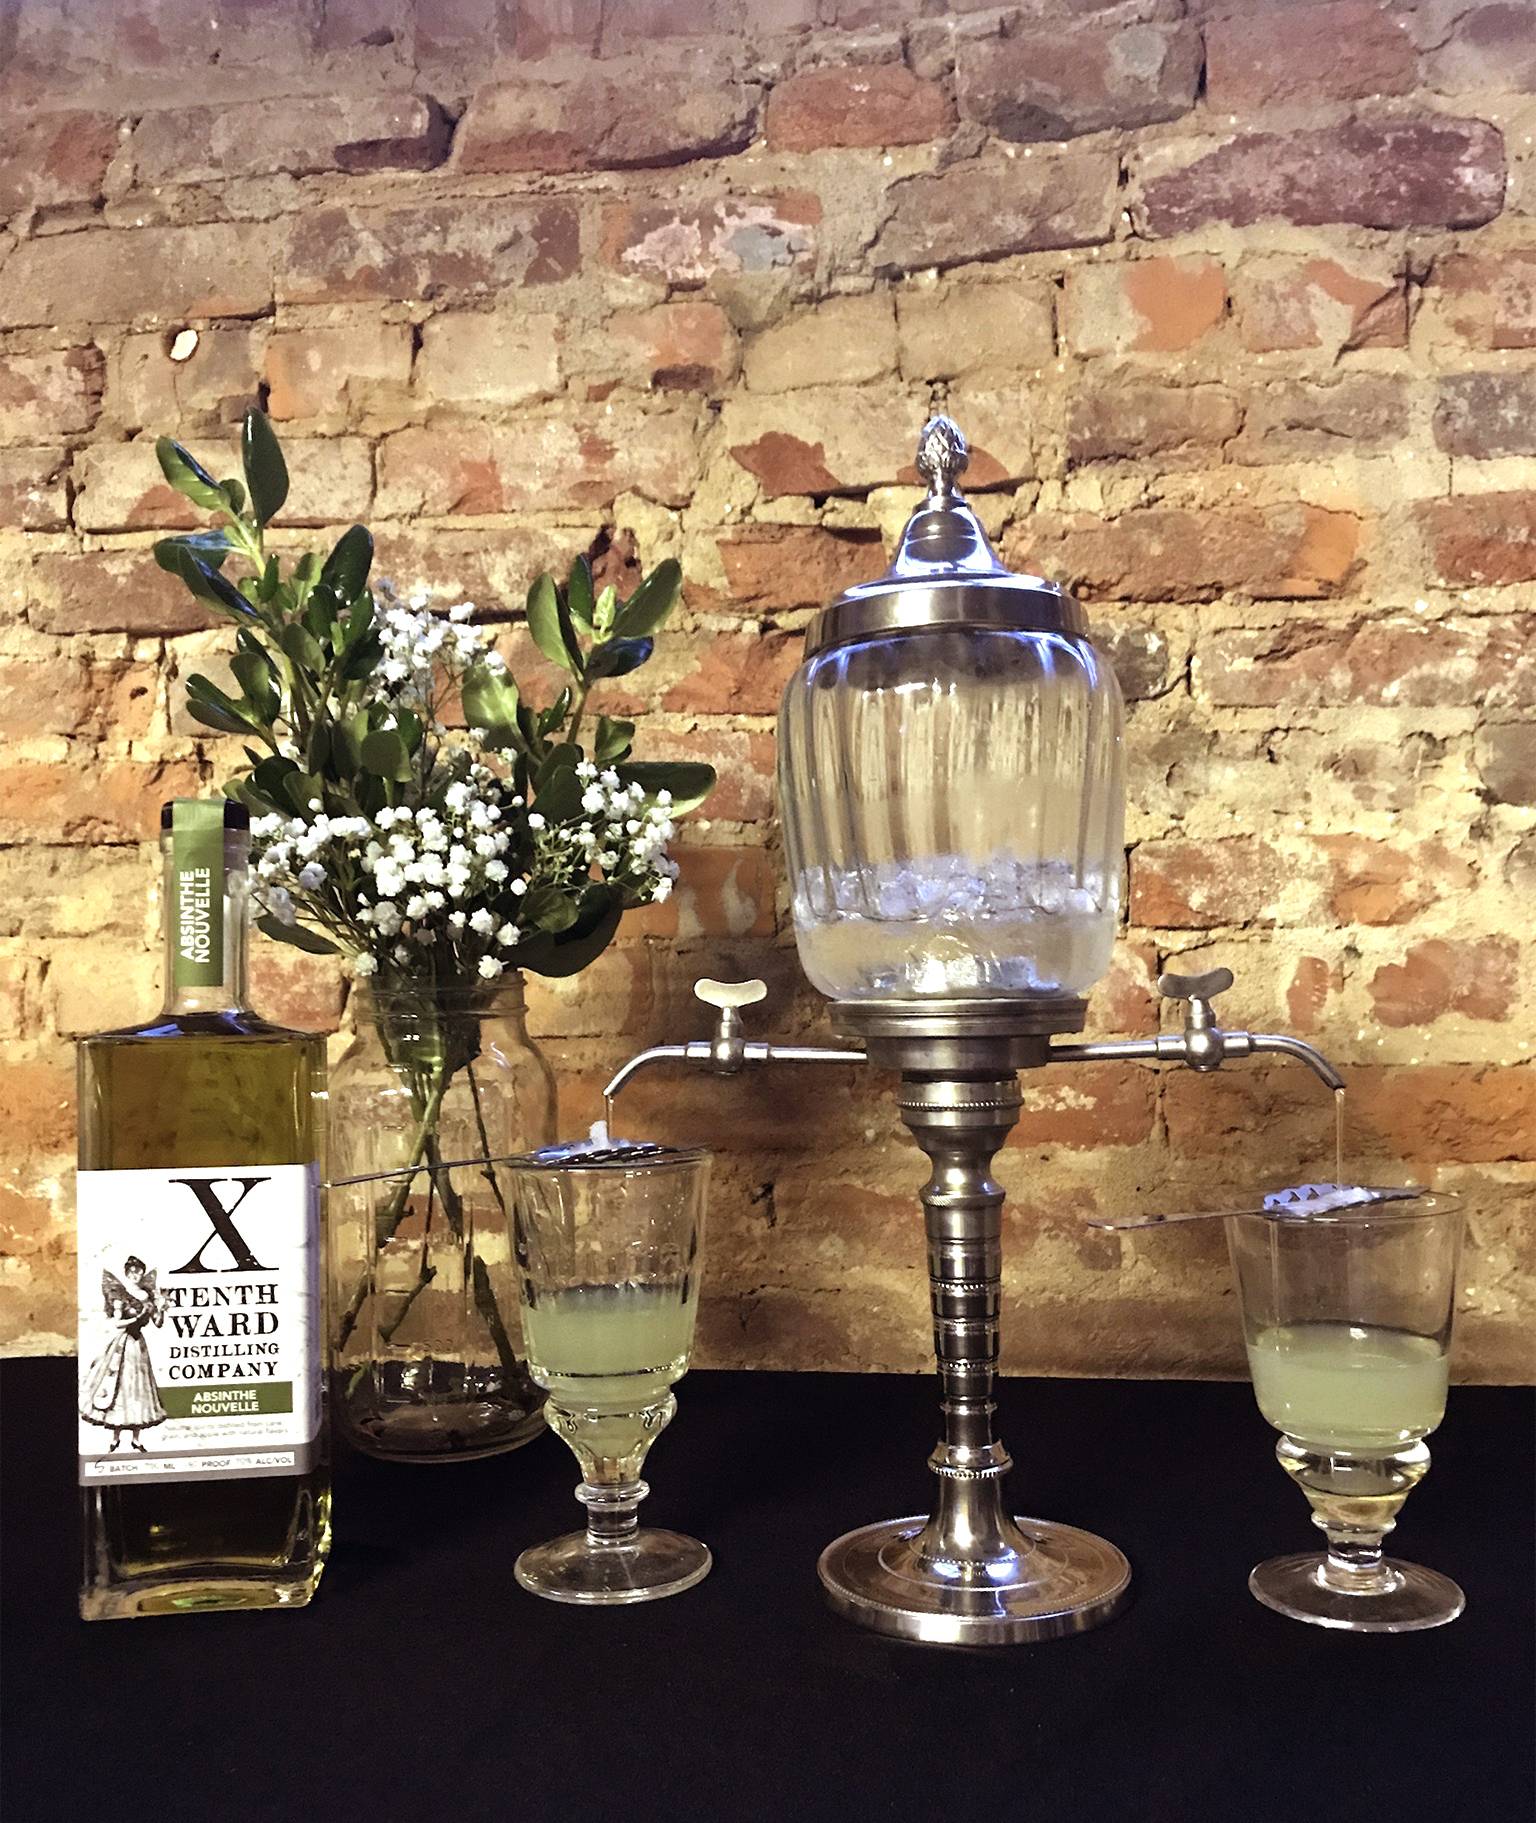 Weddings at Tenth Ward Distilling Company in Frederick, Maryland